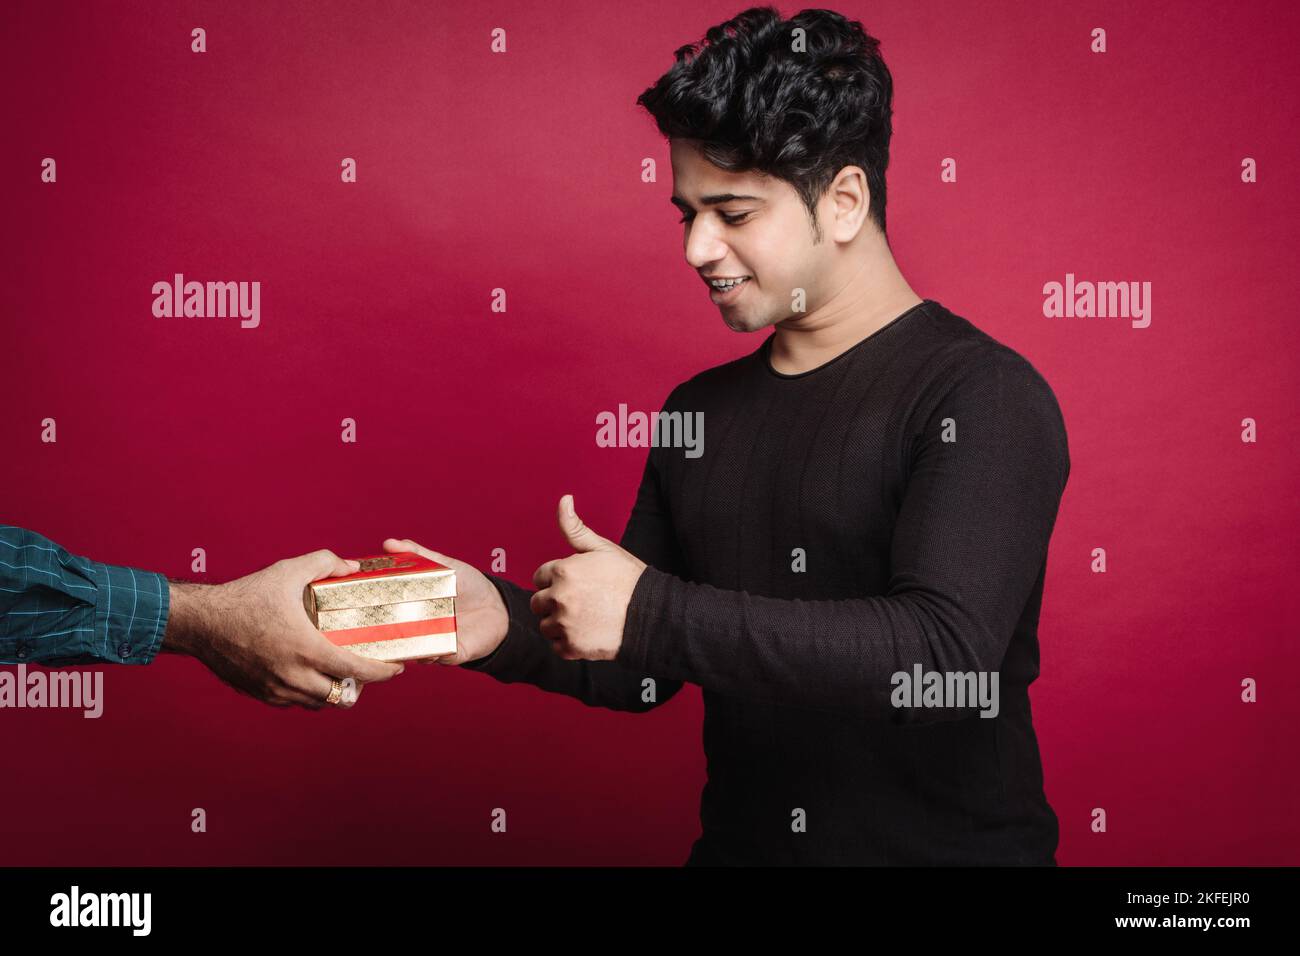 Happy Indian man in black t shirt gesturing thumbs up while receiving gift box from friend against red background Stock Photo